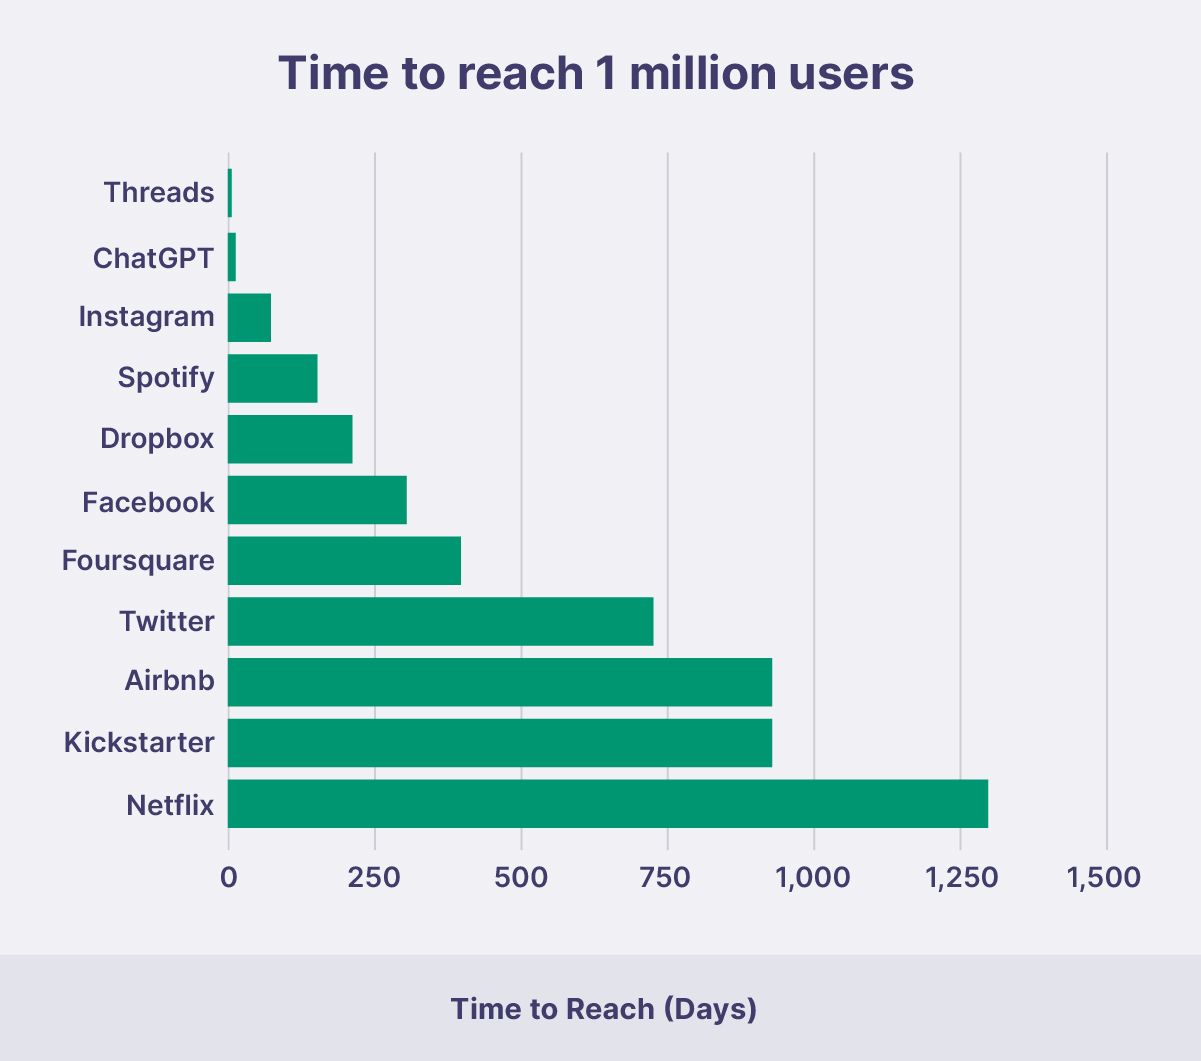 Bar chart comparing the time it took for different companies to reach 1 million users.